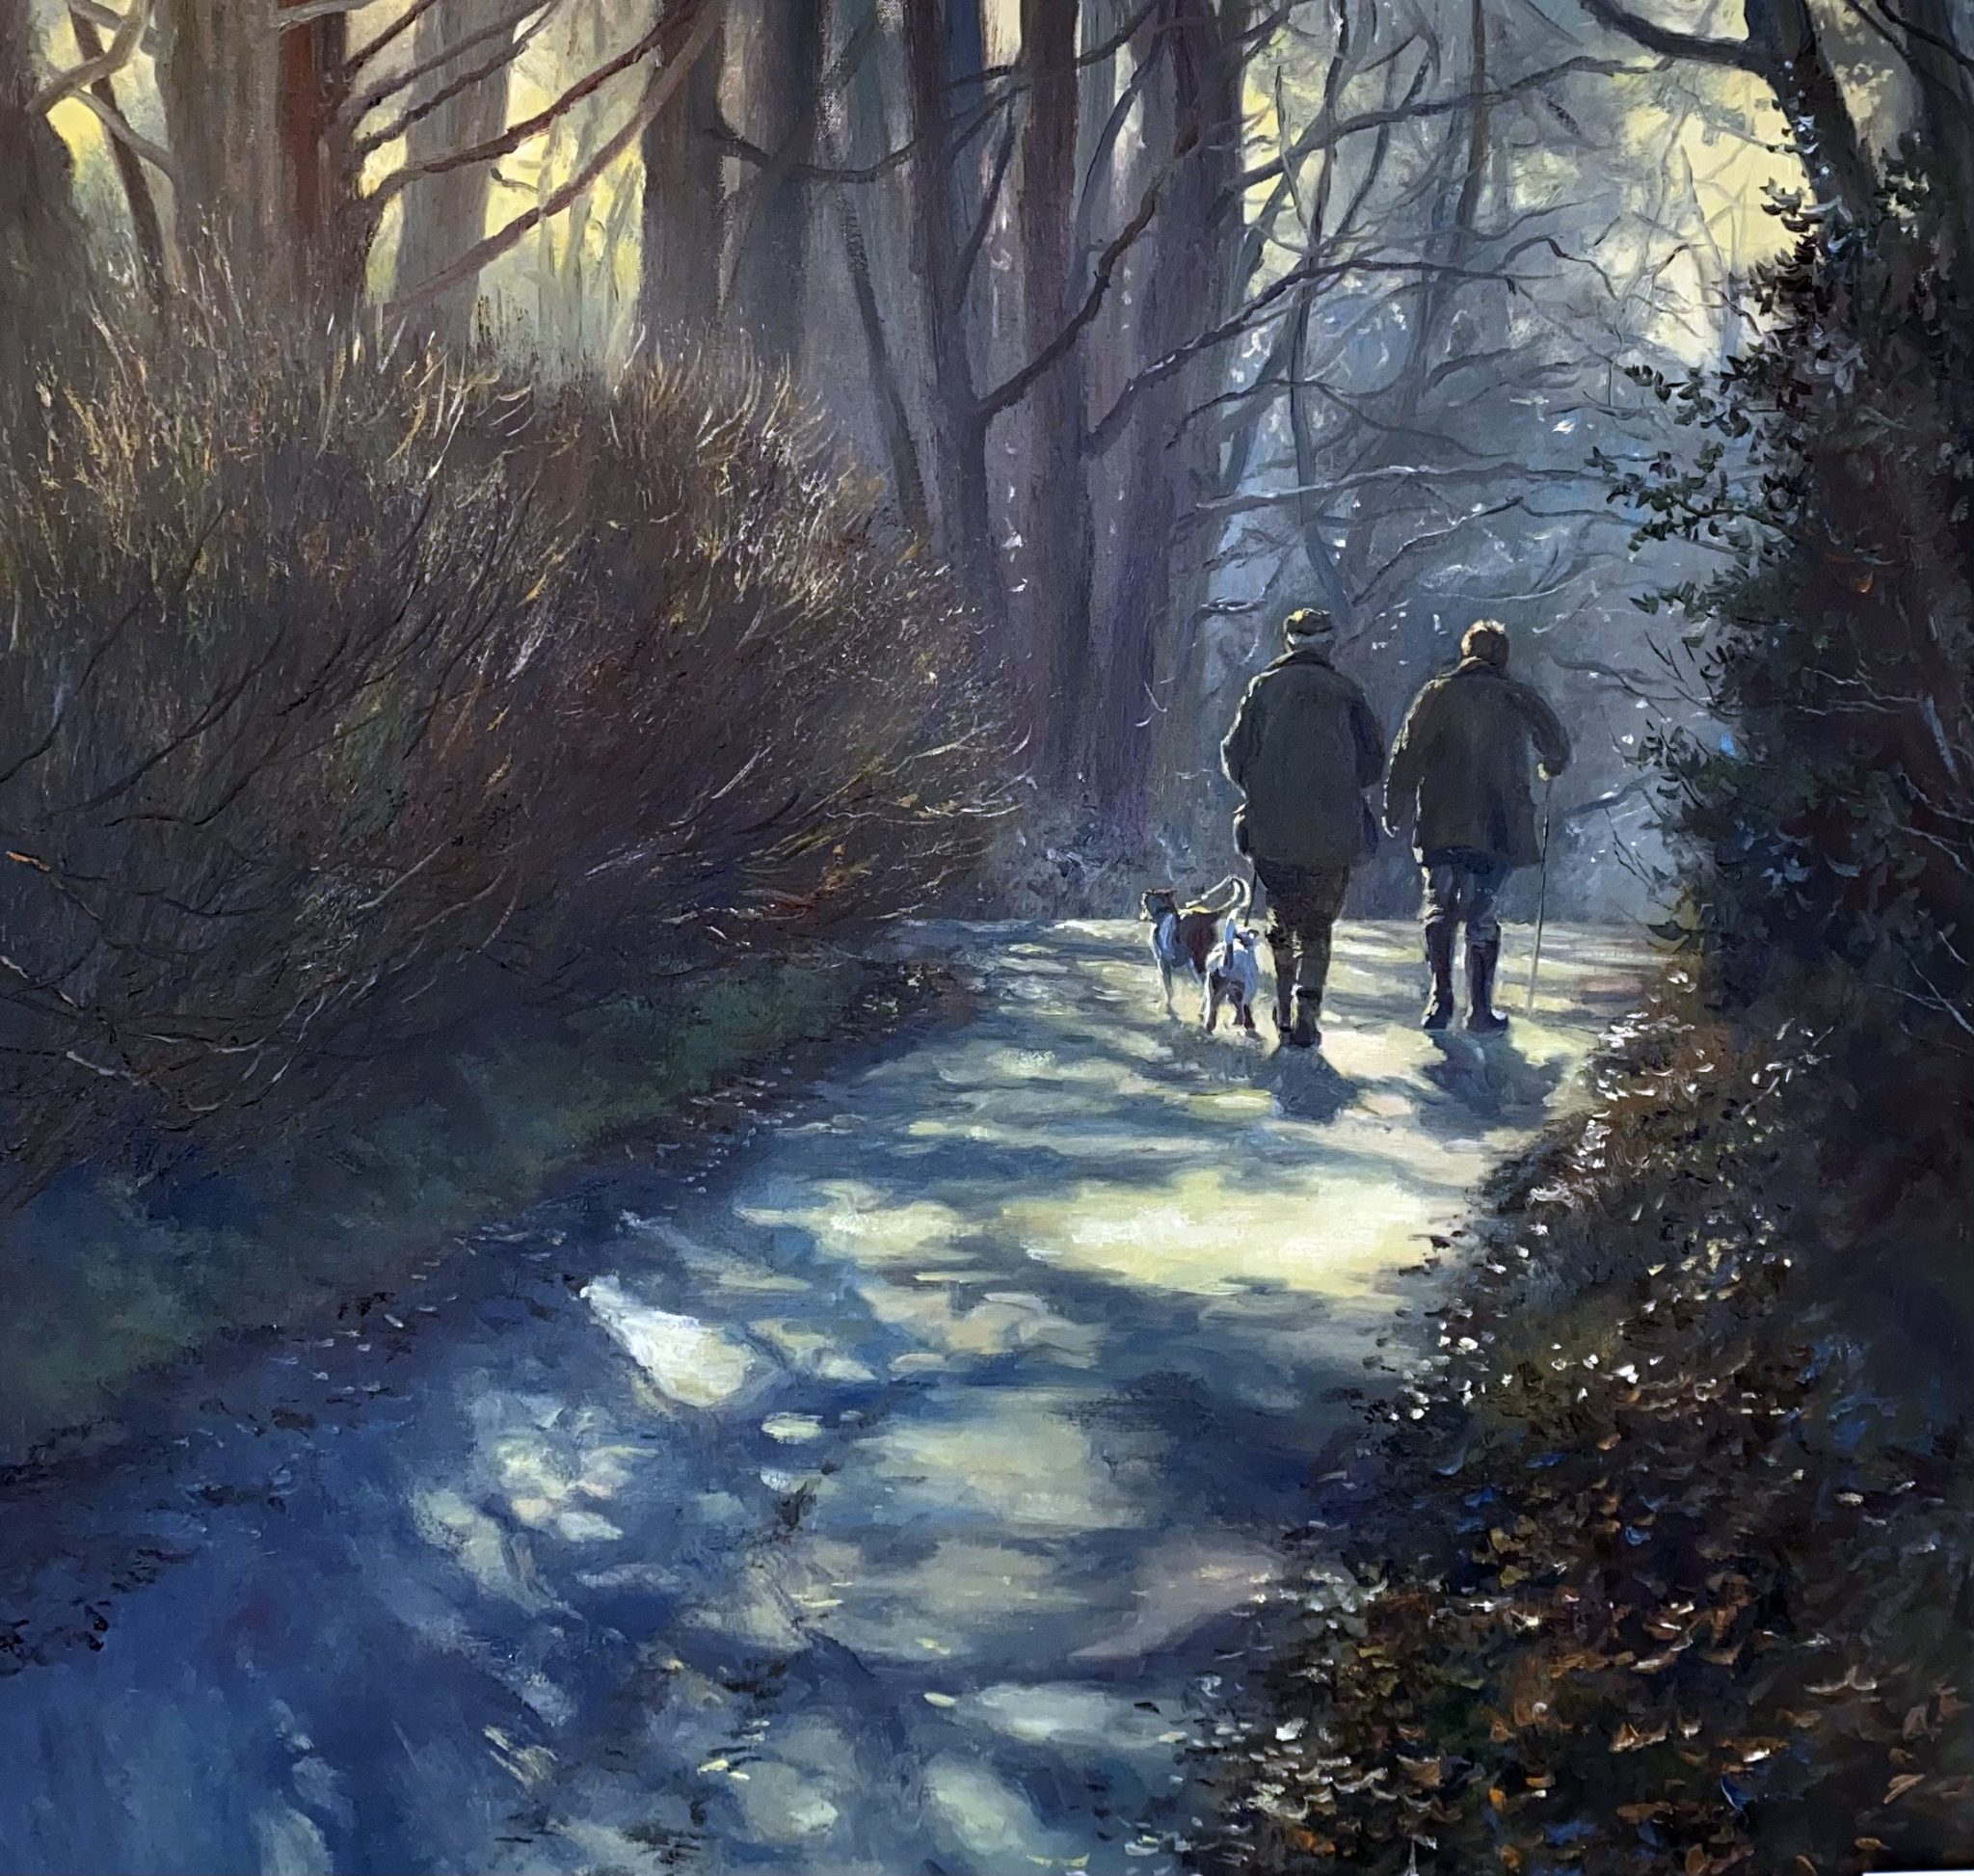 Autumn Walk is an original painting by the talented artist Stephen Hawkins